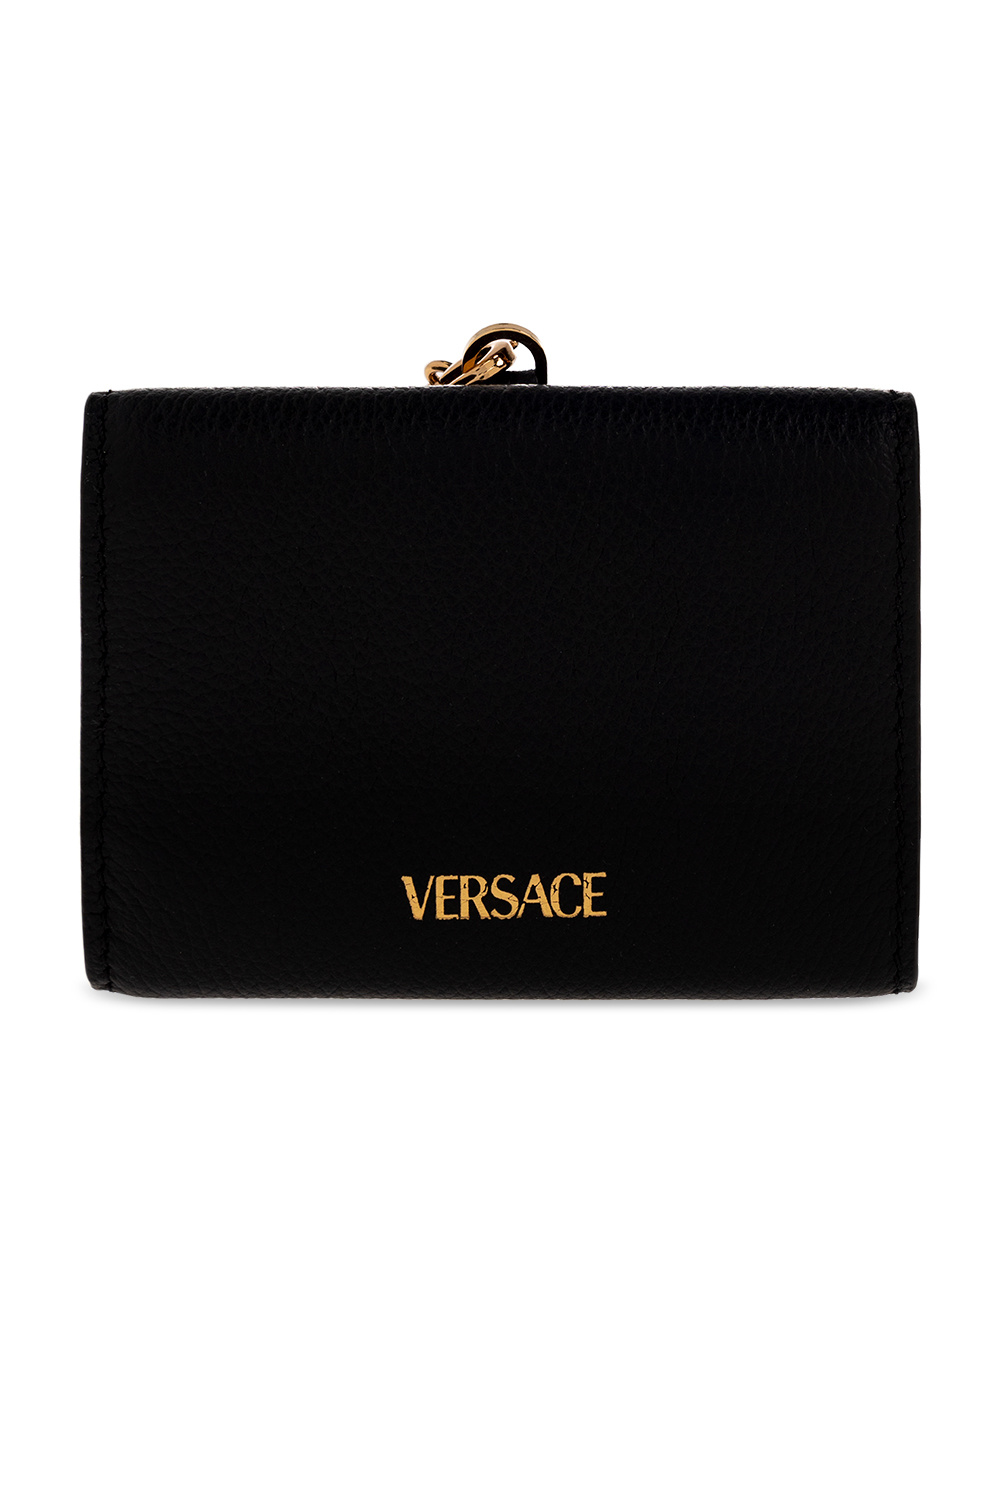 Versace Download the latest version of the app